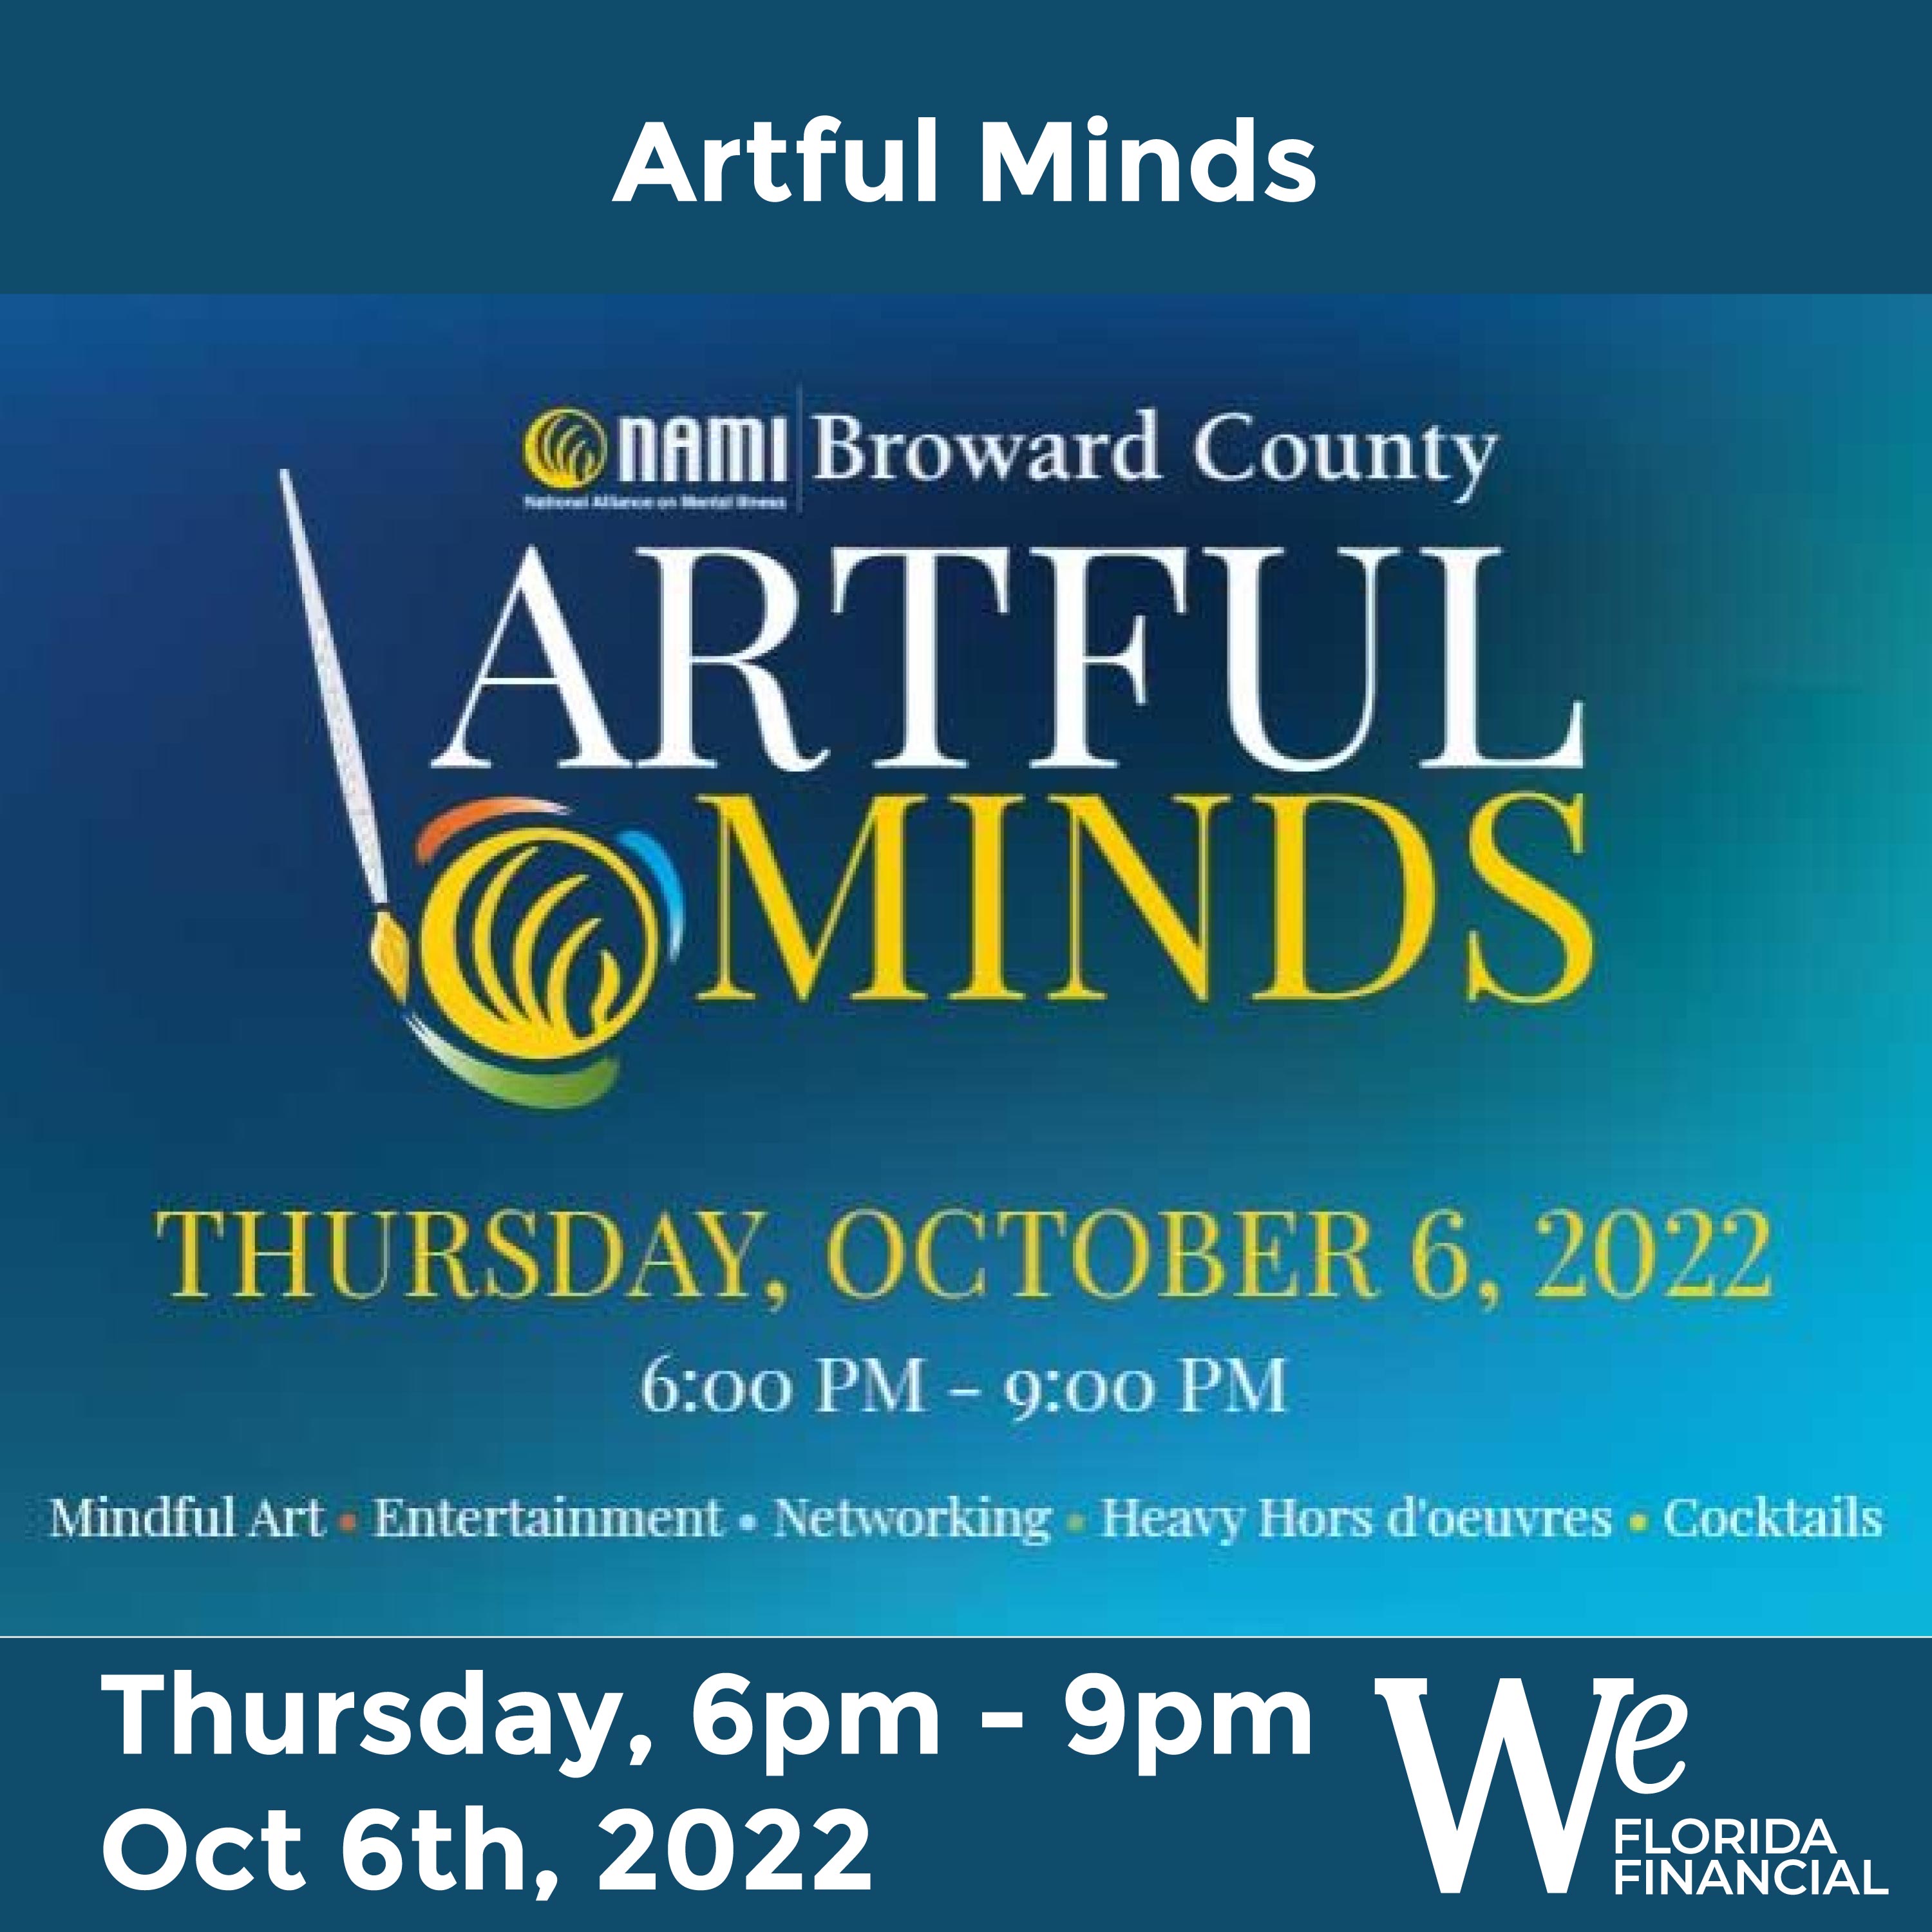 Nami Broward county Artful Minds Thursday, October 6th 2022  6PM - 9PM - Mindful art - Entertainment - Networking - Heavy Hors d'ouvres - cocktails